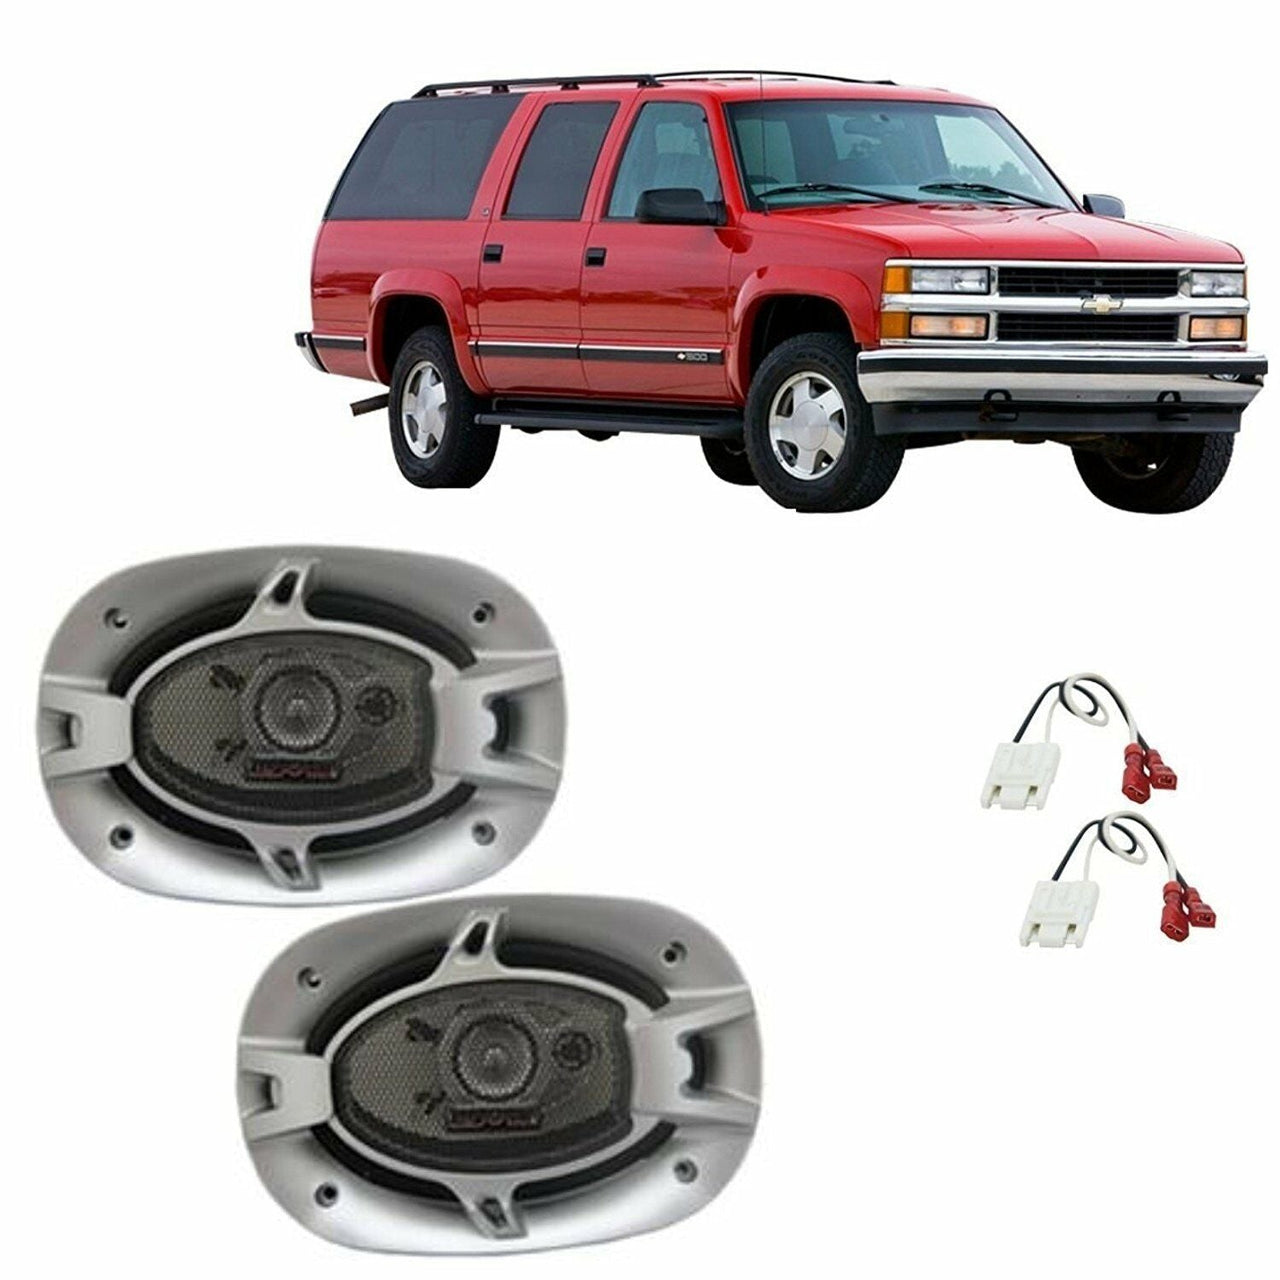 Rear Factory Speaker Replacement Package for 1988-1994 Chevy Suburban Absolute BLS-4602